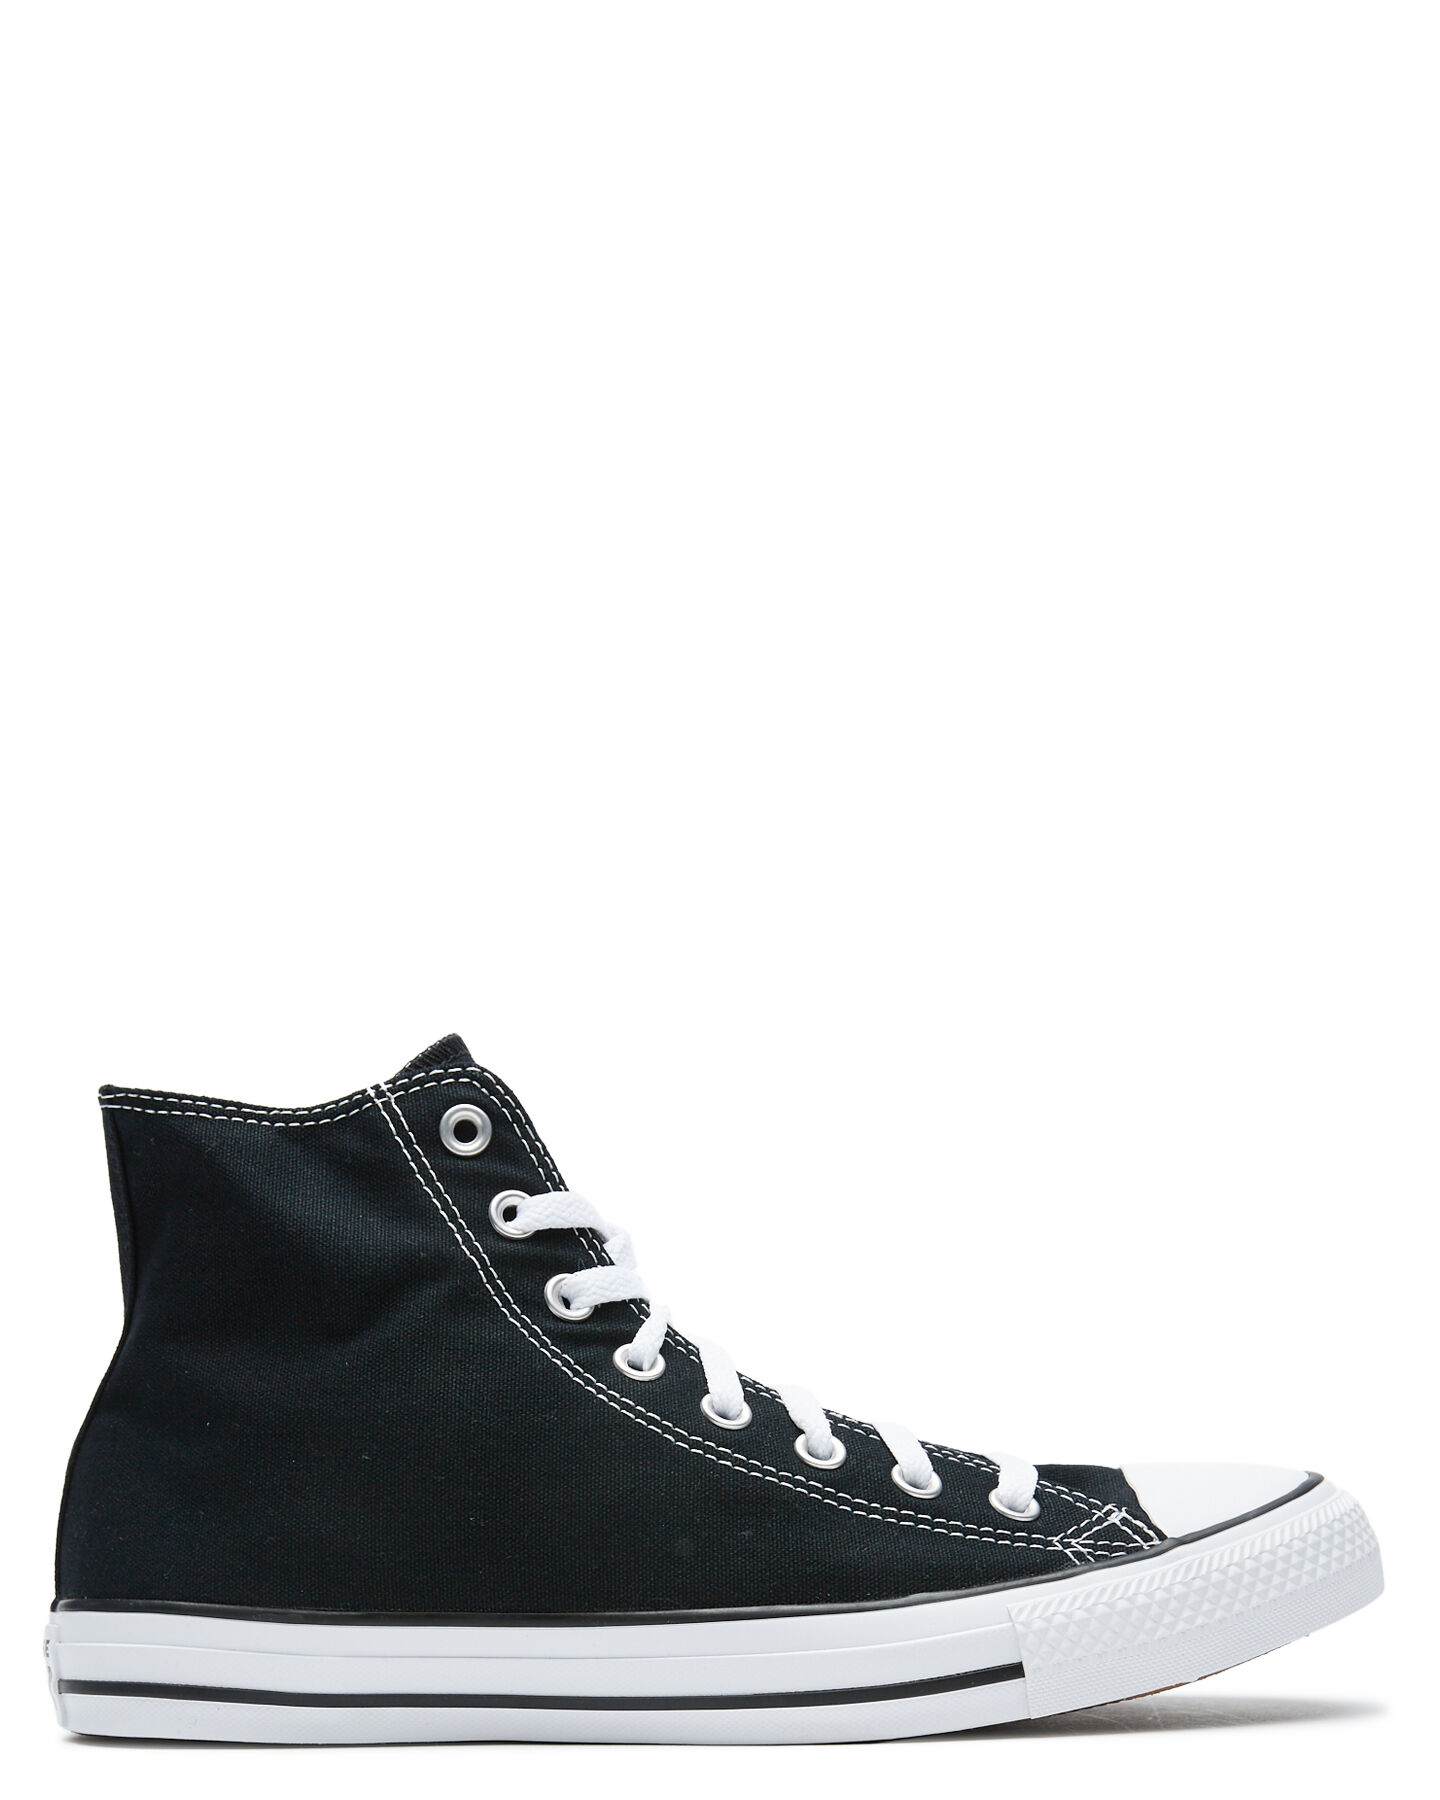 all black high top converse size 4